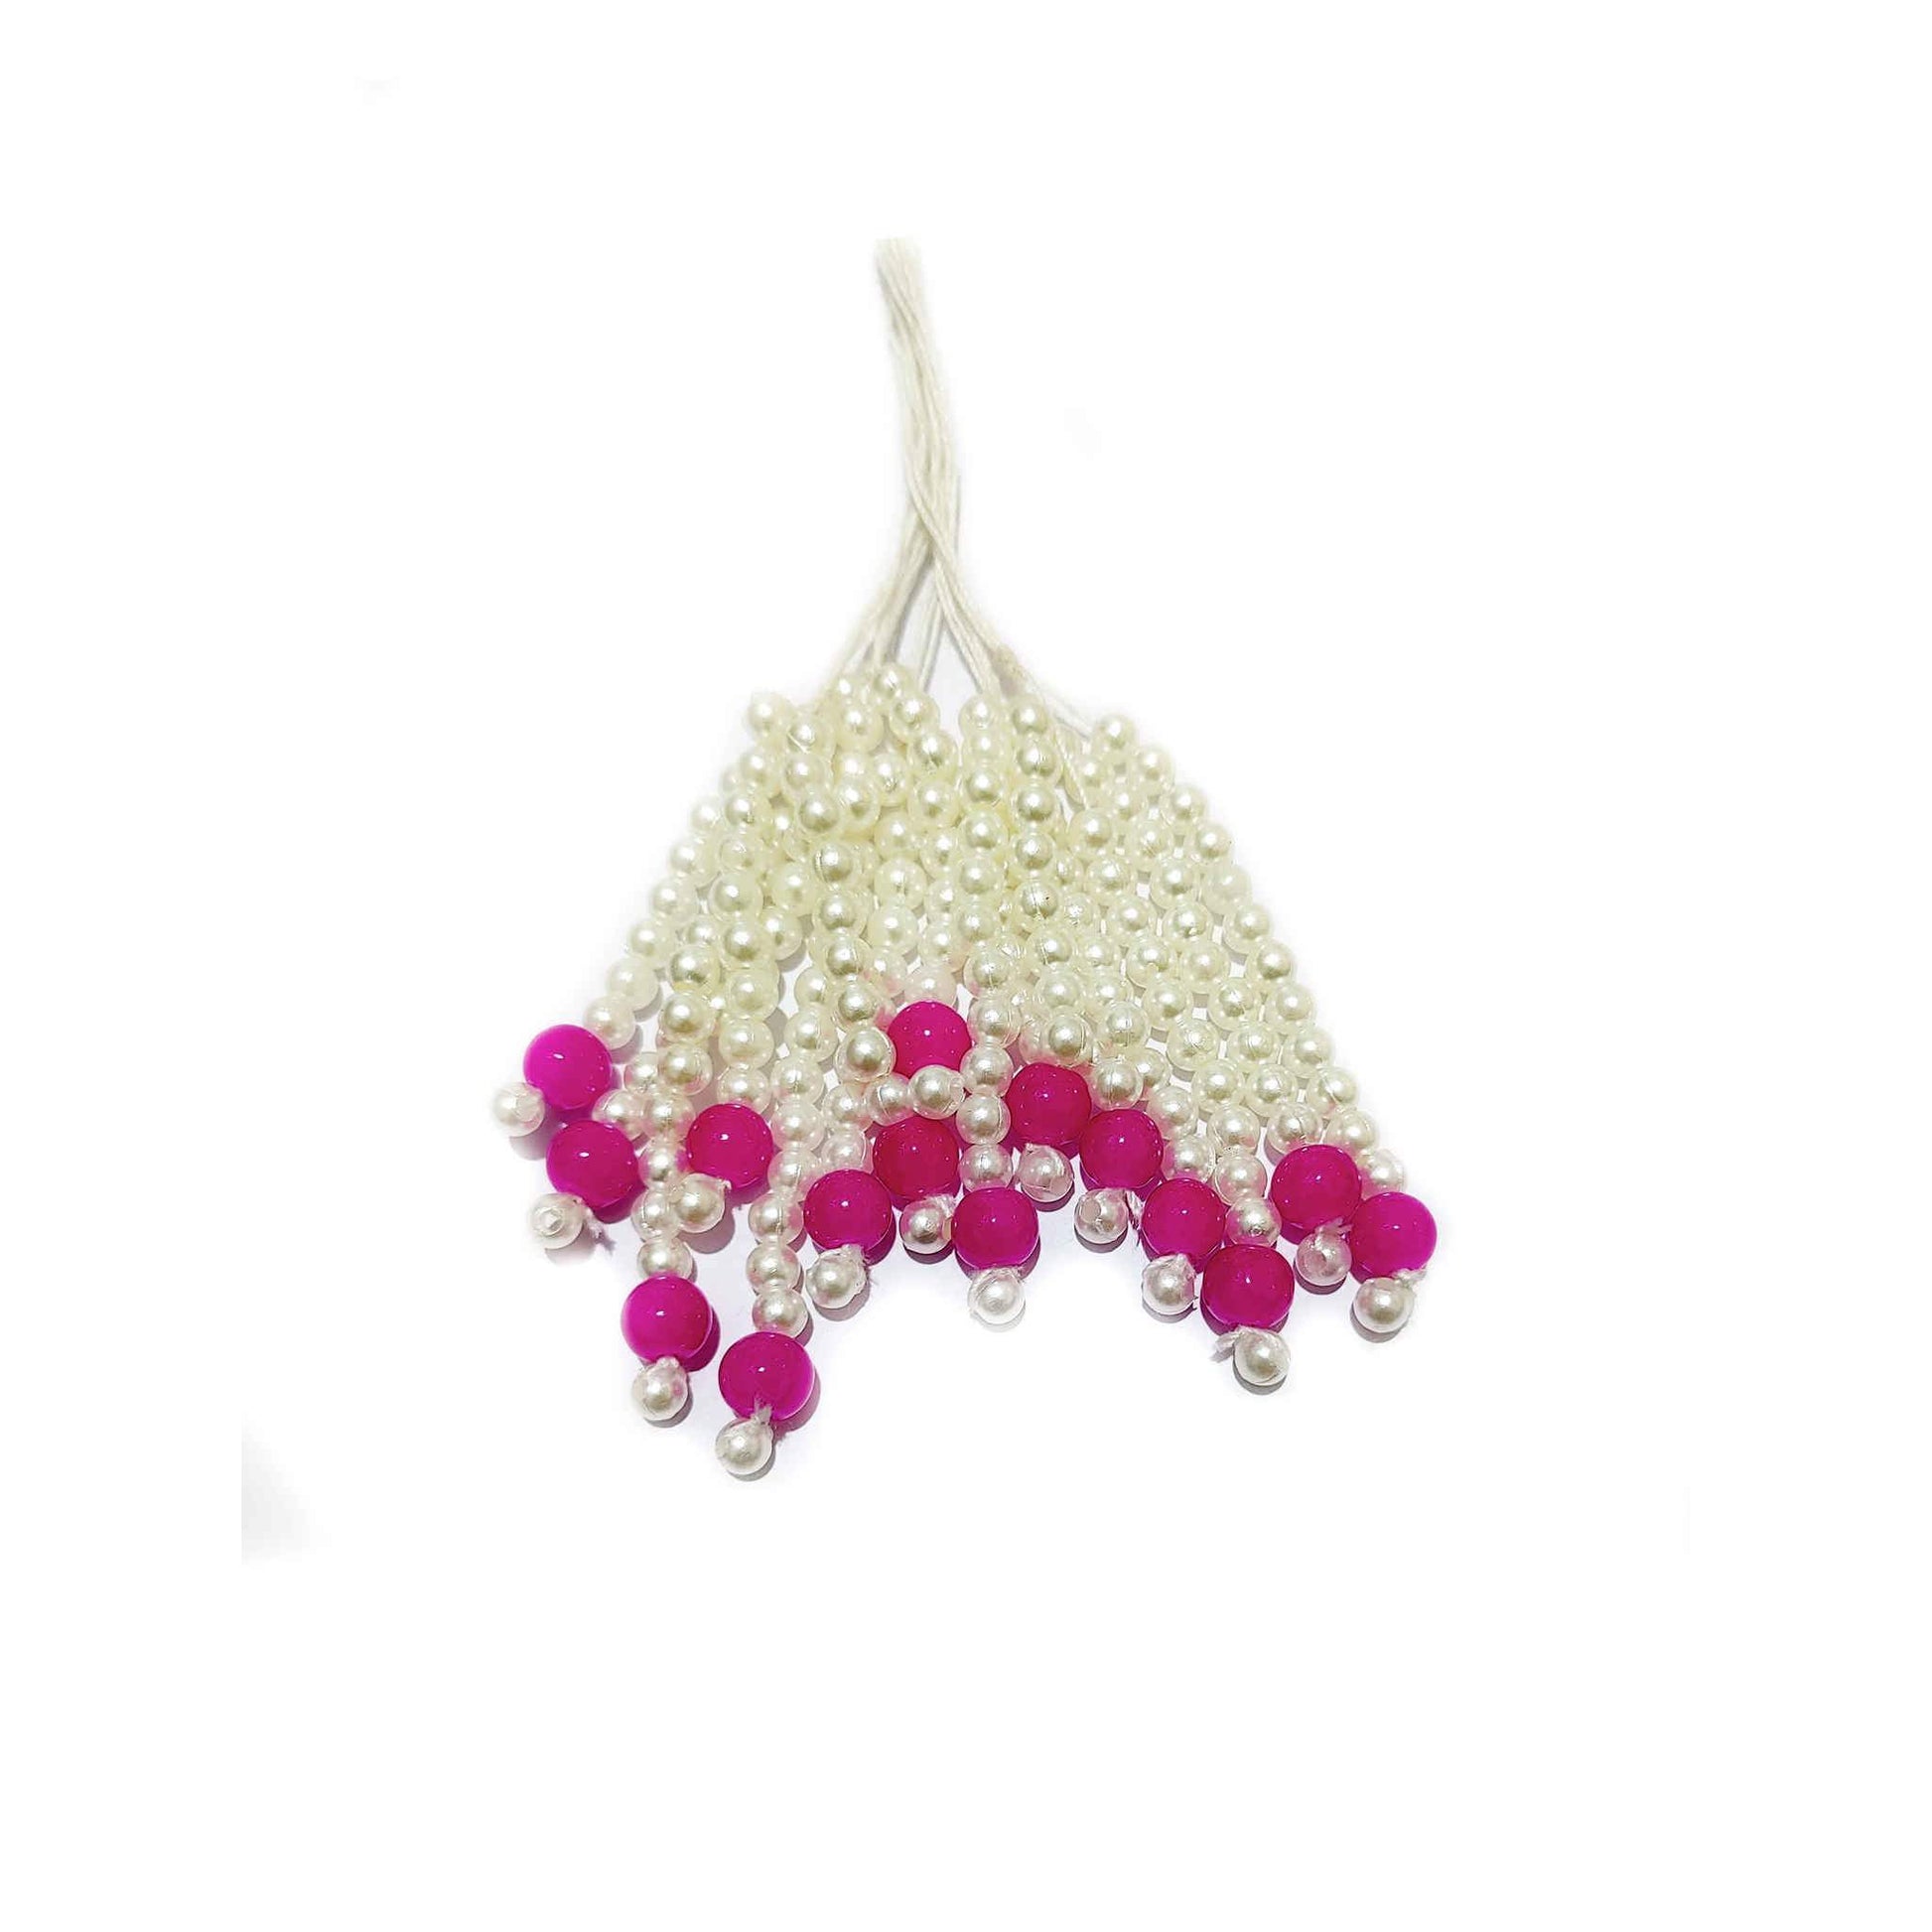 Indian Petals Mini Pearl Beads Handmade DIY Craft, Jewelry Fringe Tassel with Colored Beads - Design 826, Deep Pink